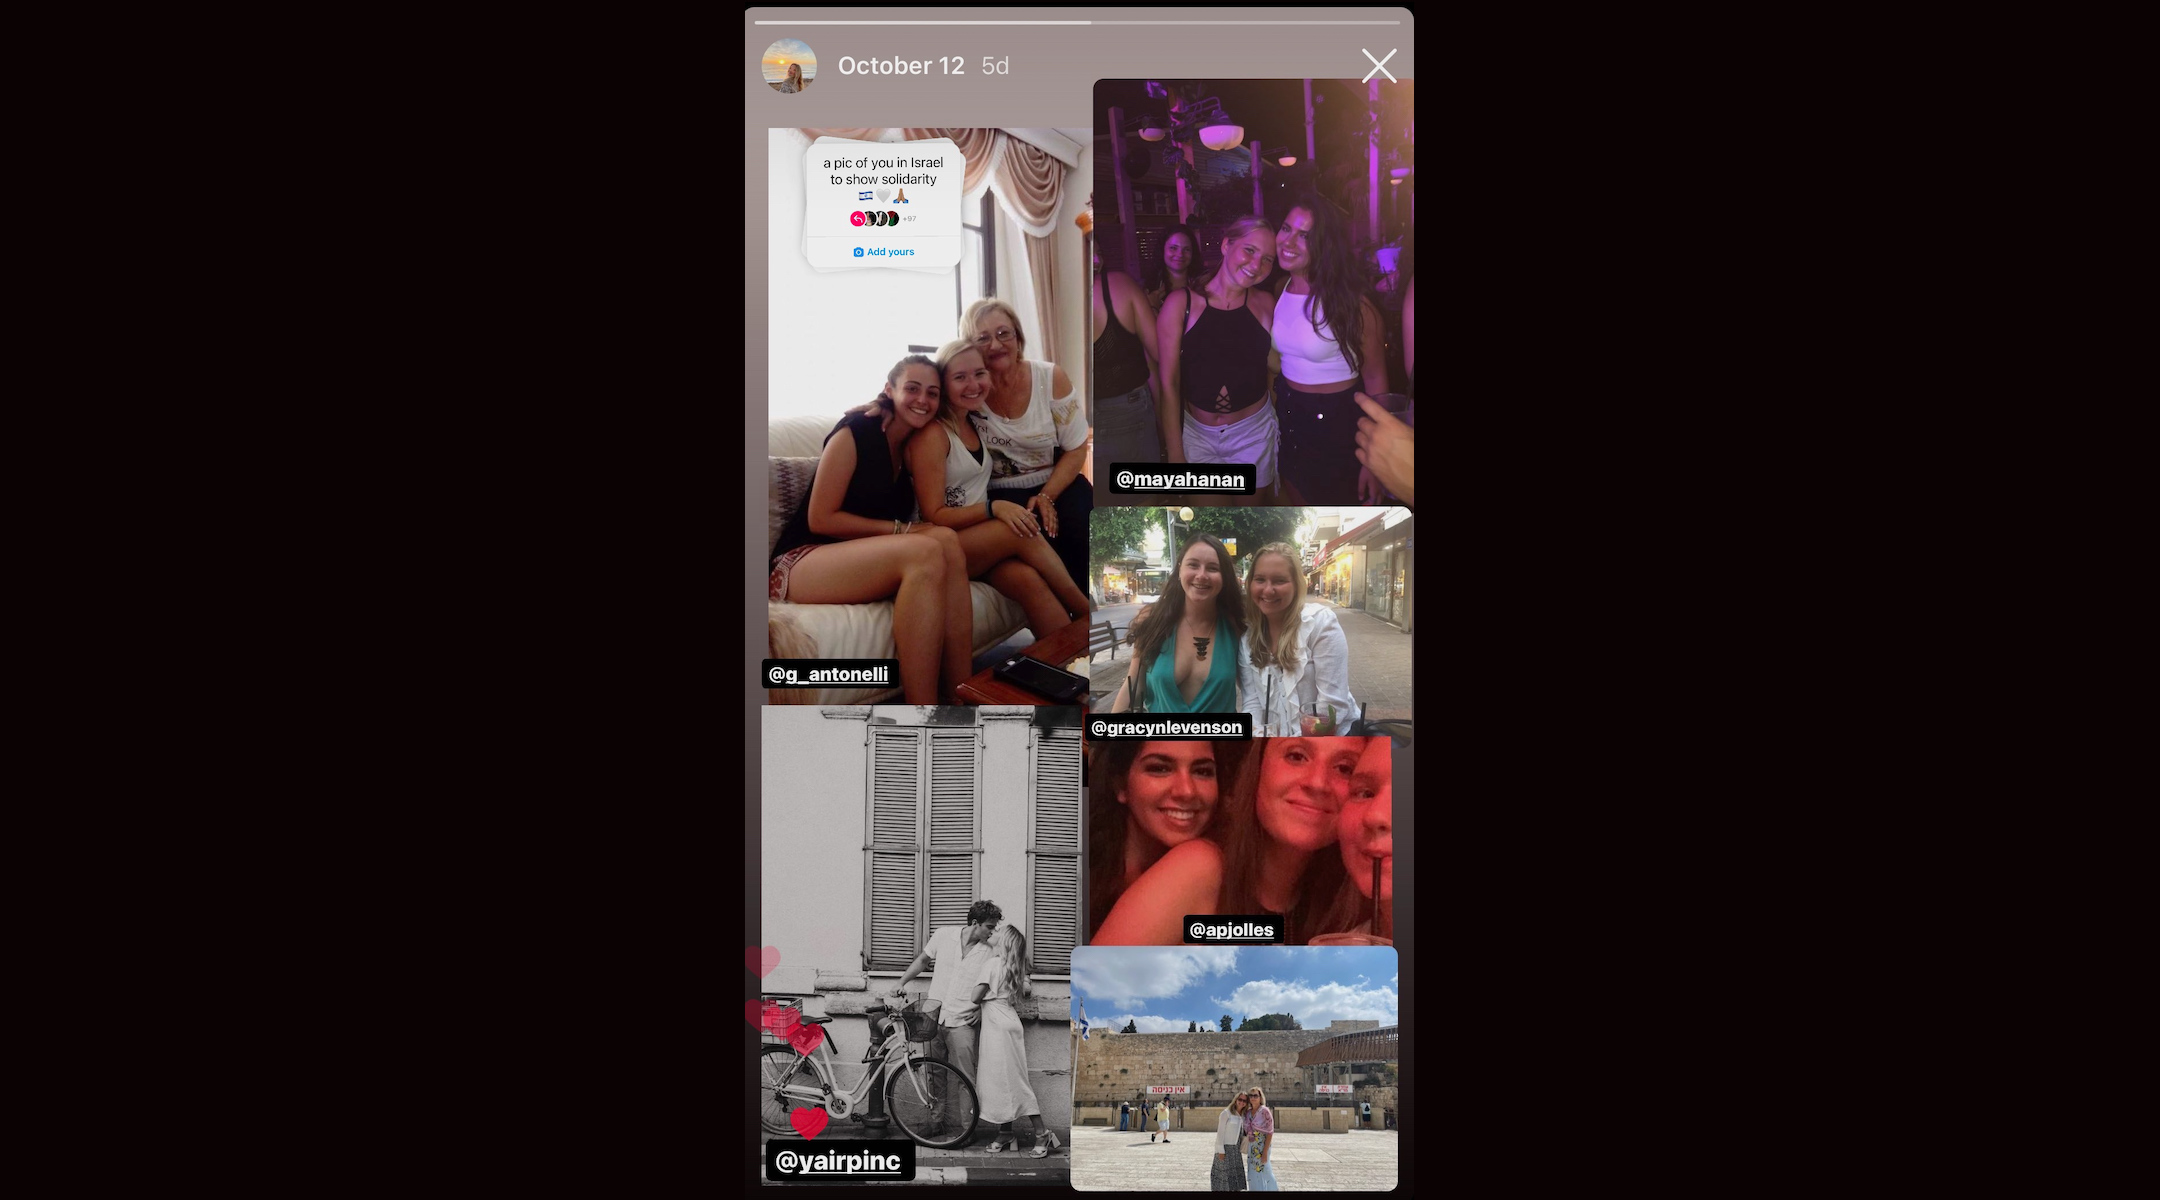 An Instagram post featuring photos of the user in Israel